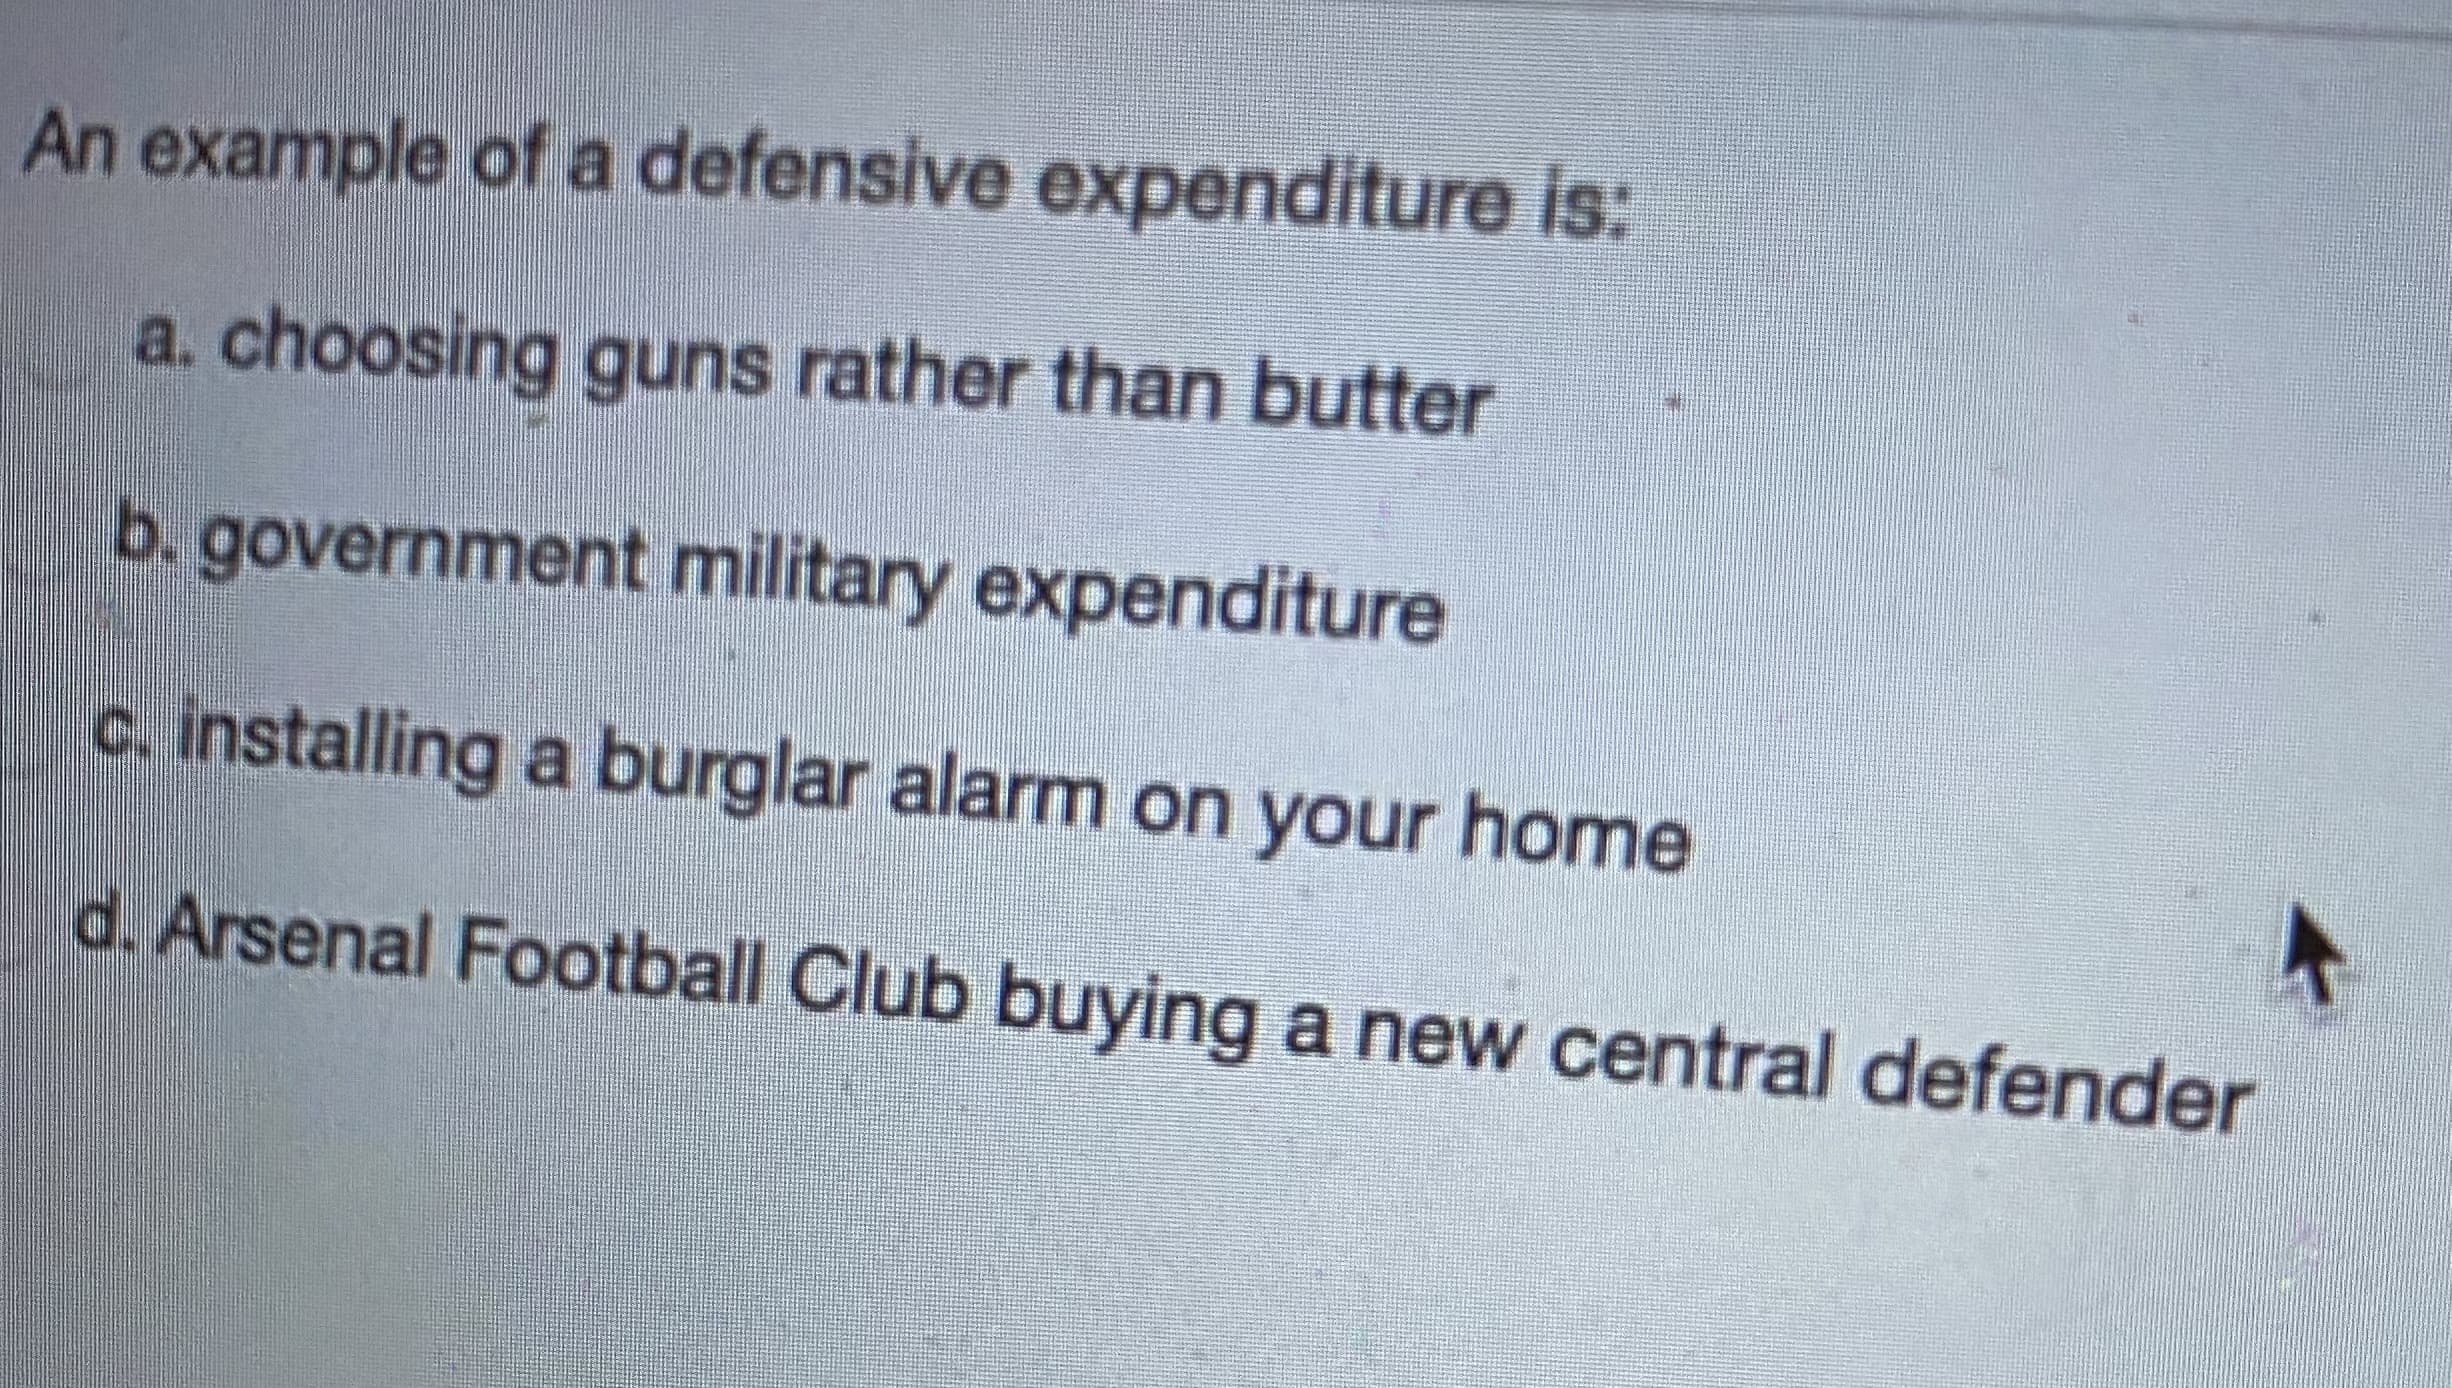 An example of a defensive expenditure is:
a. choosing guns rather than butter
b. government military expenditure
c. installing a burglar alarm on your home
d. Arsenal Football Club buying a new central defende
